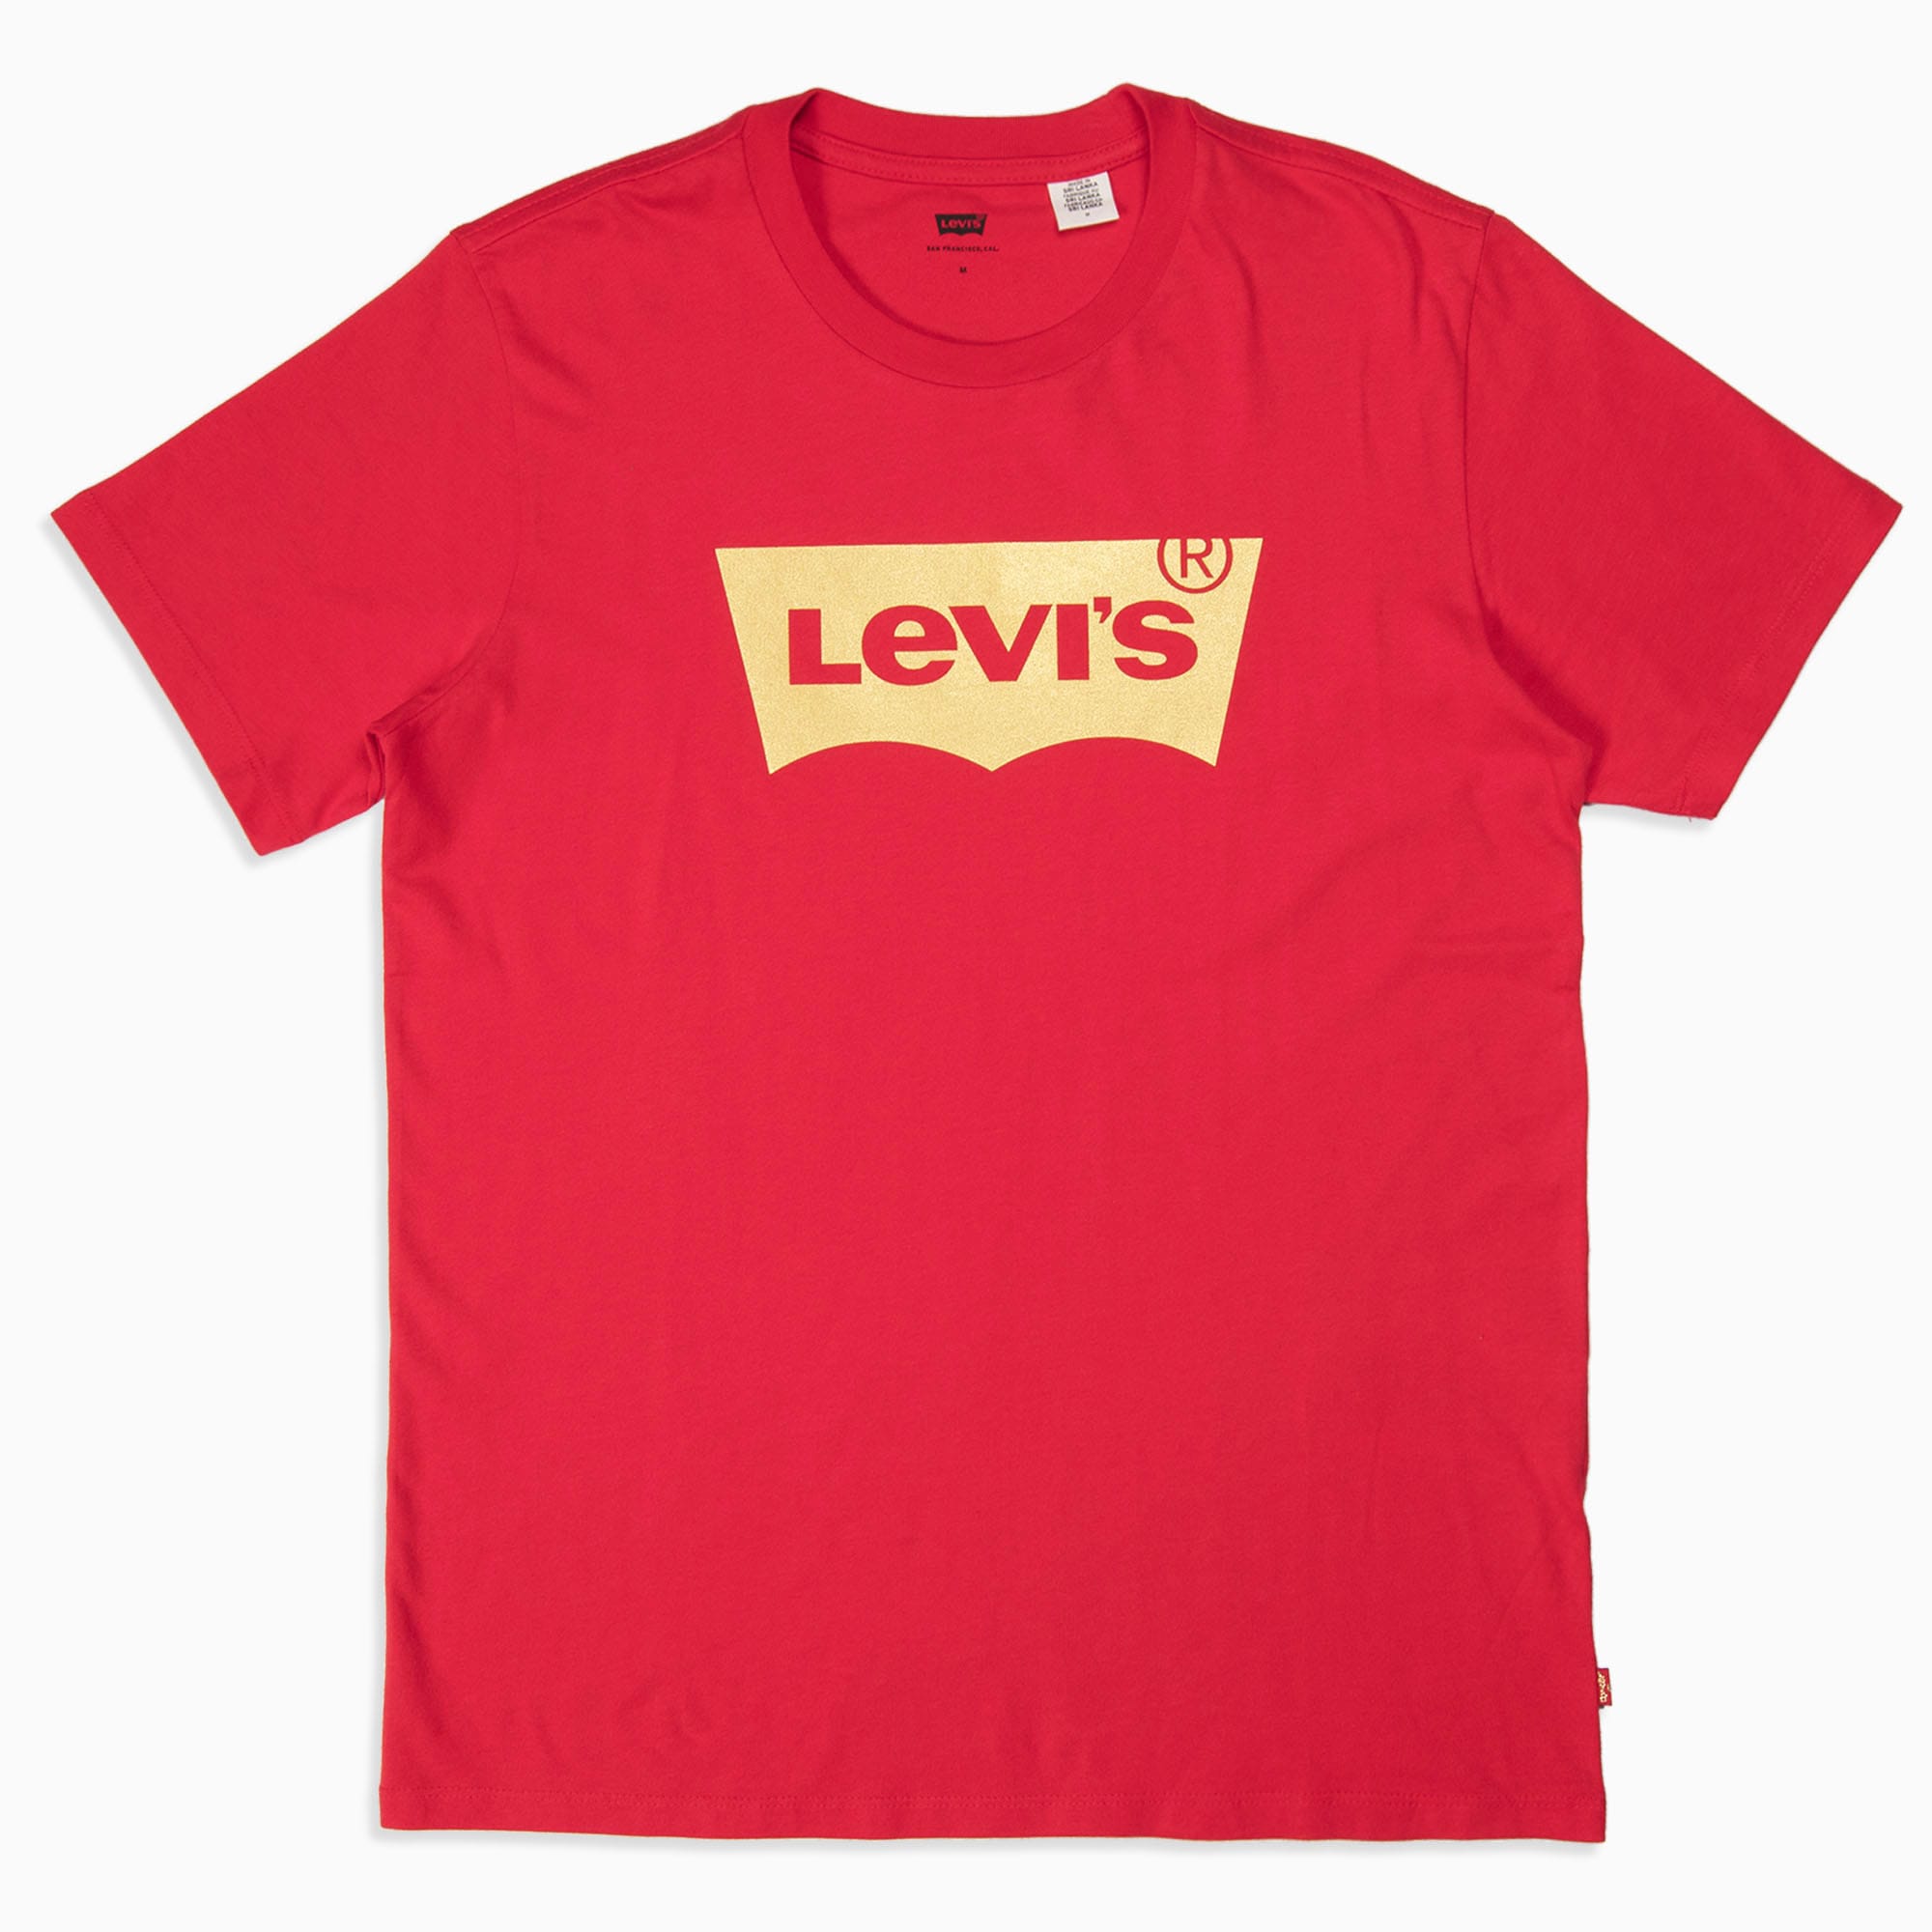 Follow Your Resolutions With The All New Levi’s® 2018 Chinese New Year ...